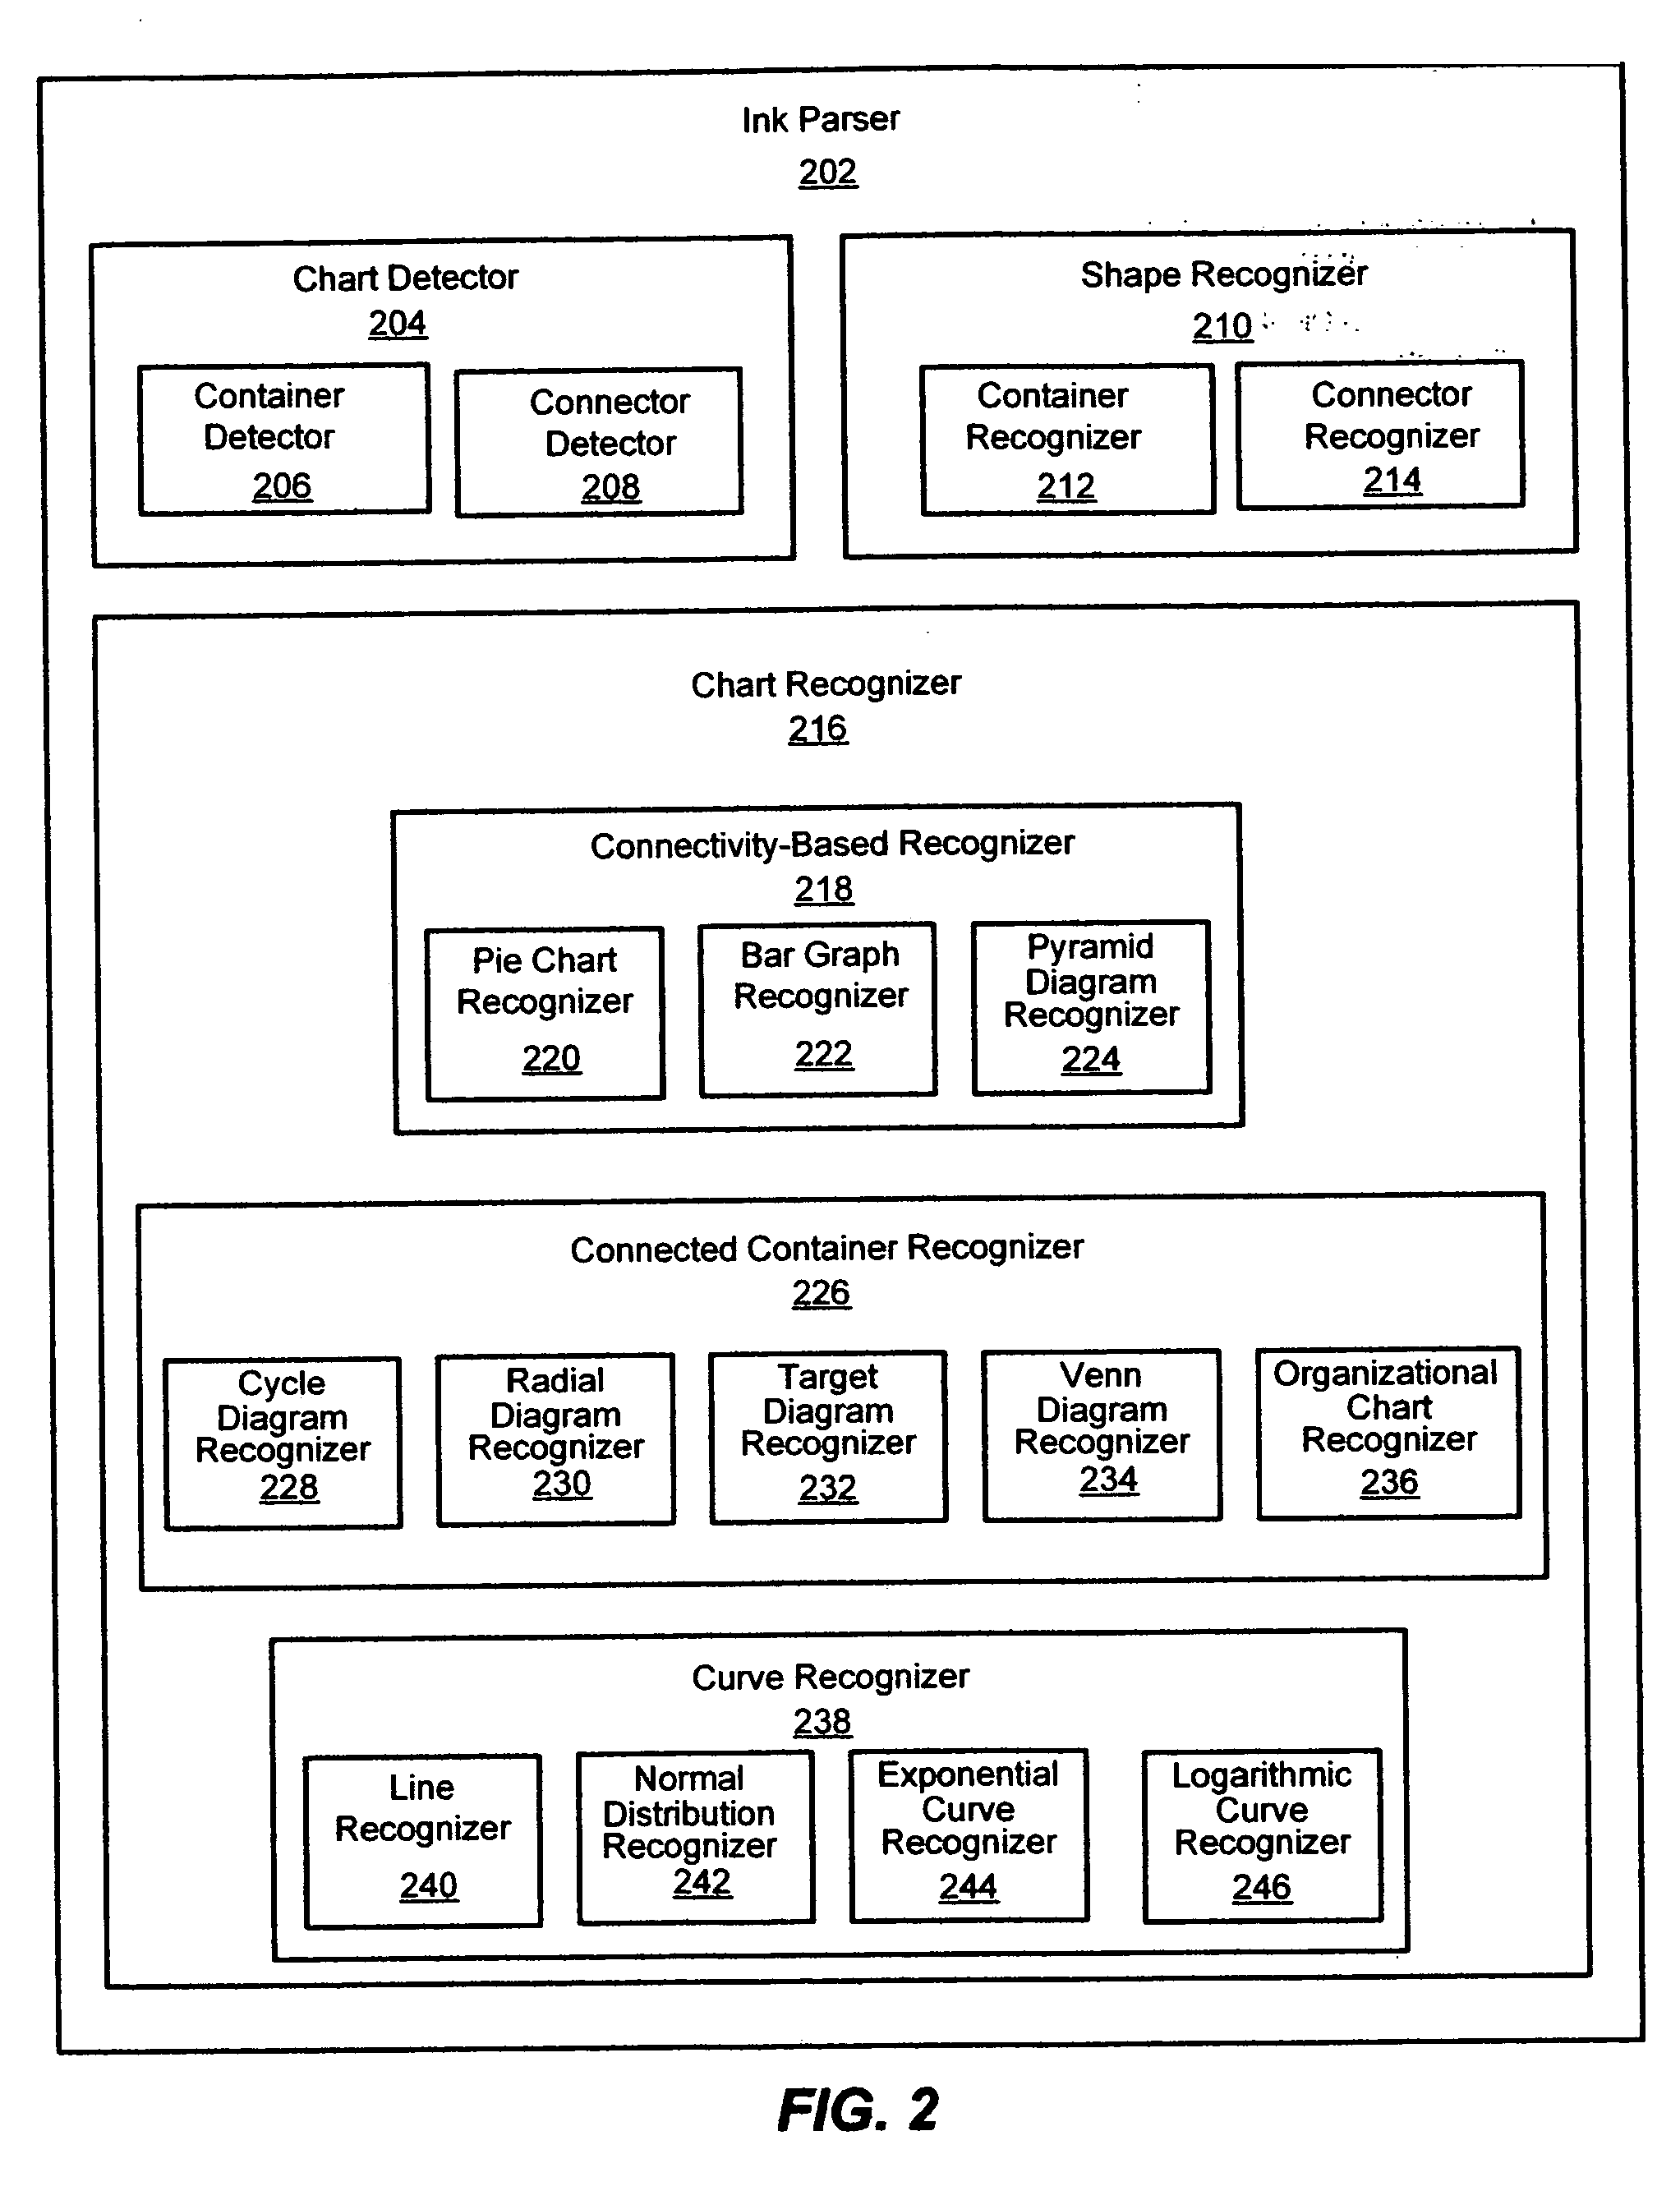 System and method for connected container recognition of a hand-drawn chart in ink input